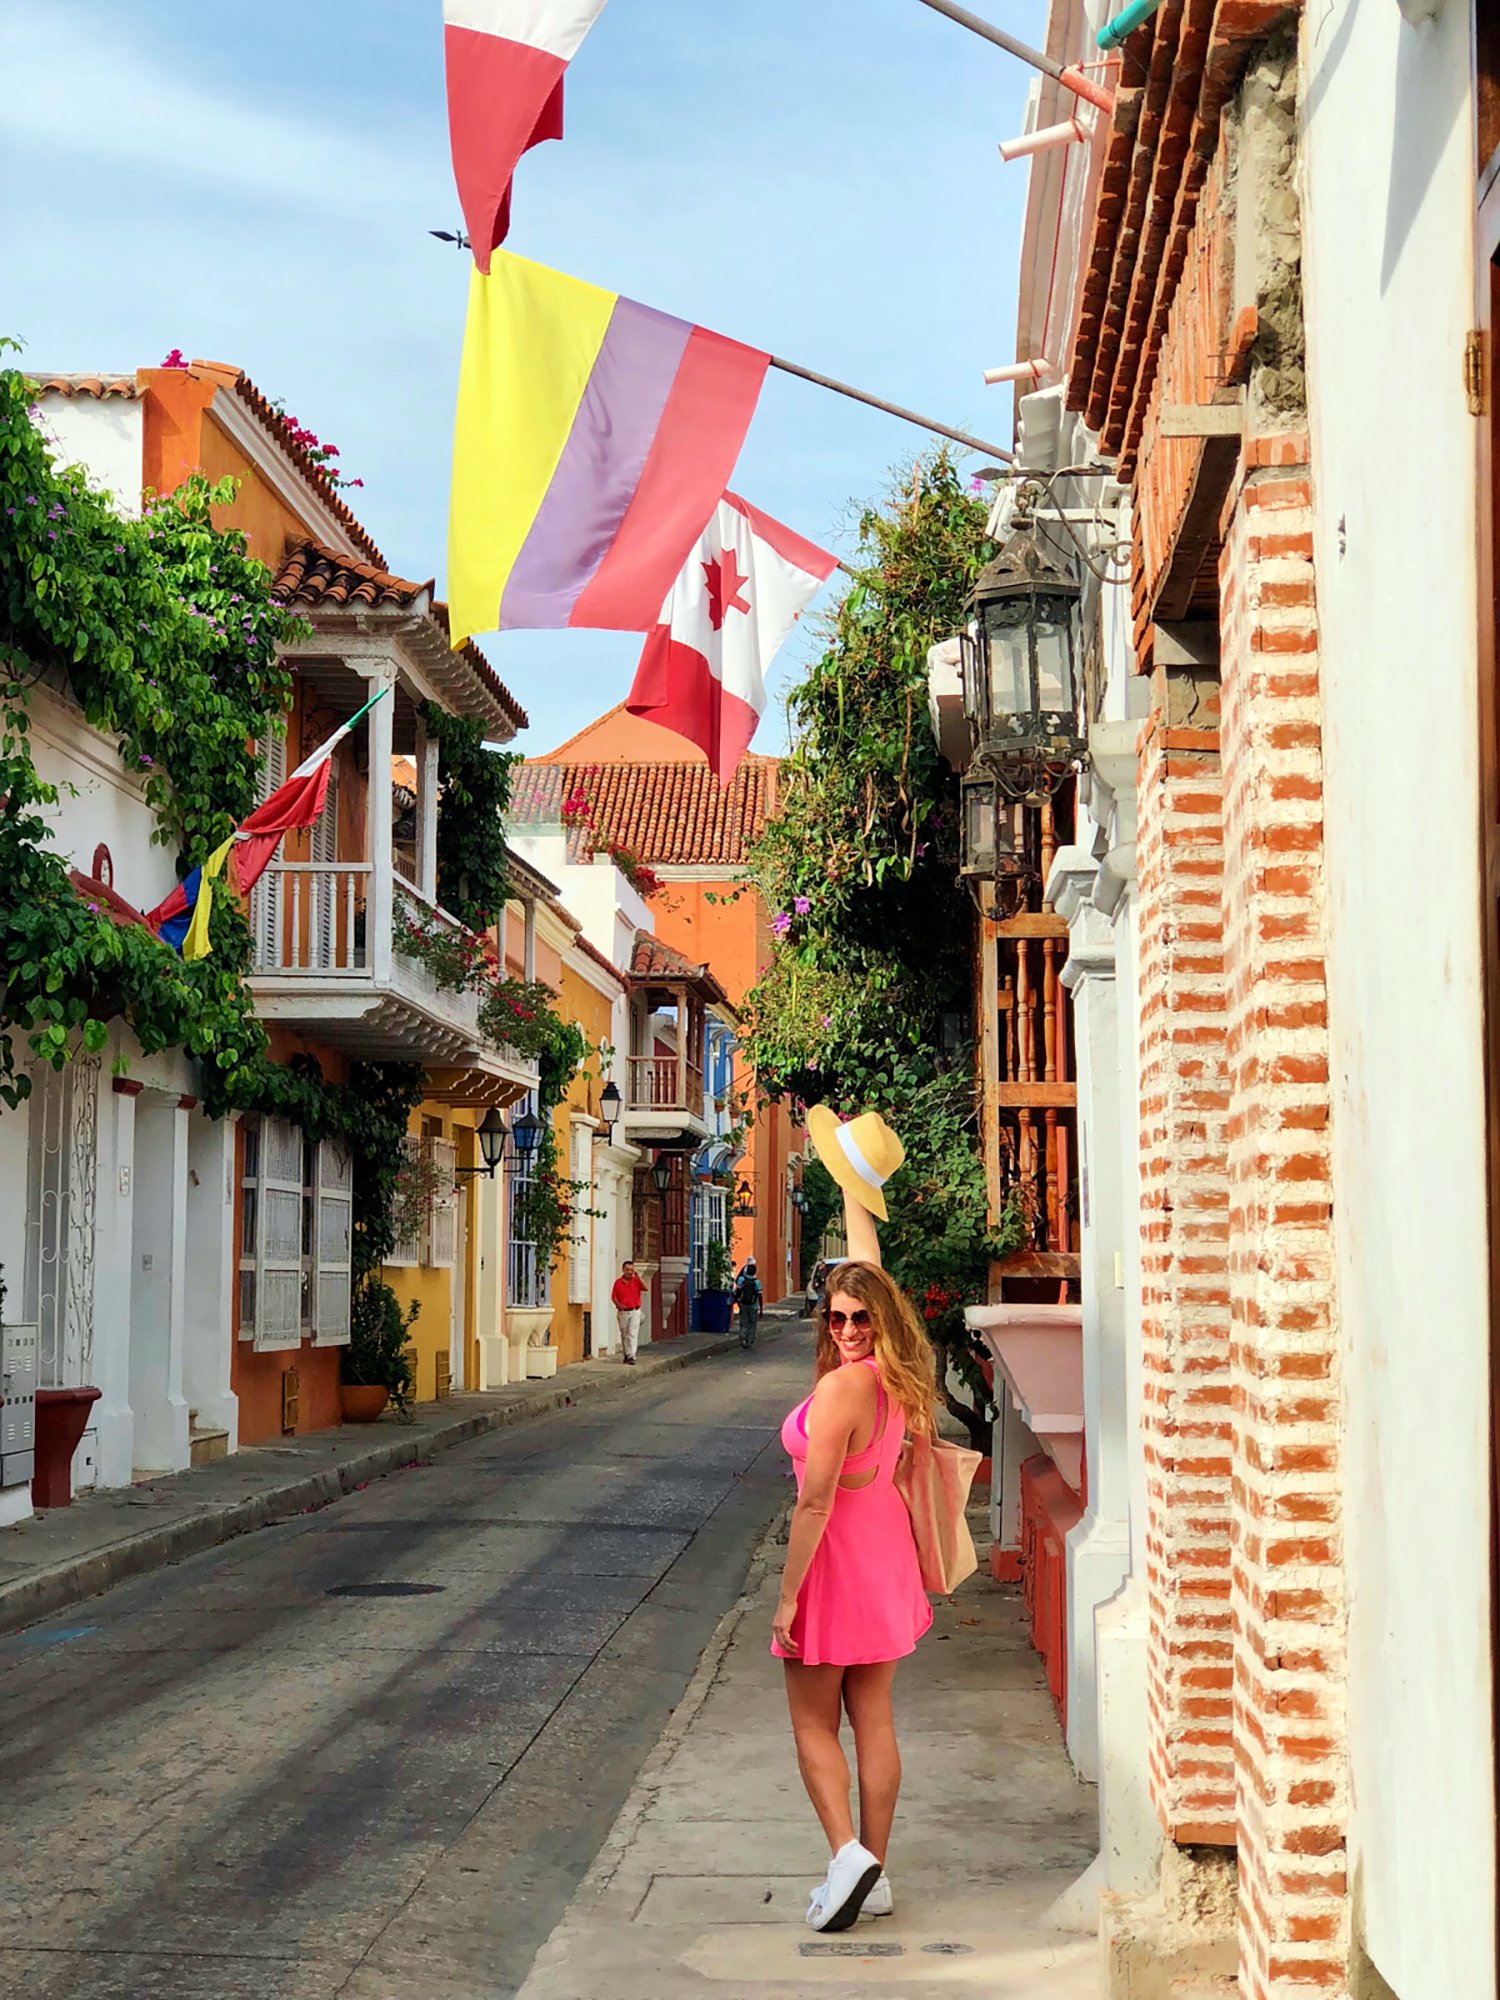 woman stanging under flags in a colorful town wearing a pink sundress and white sneakers